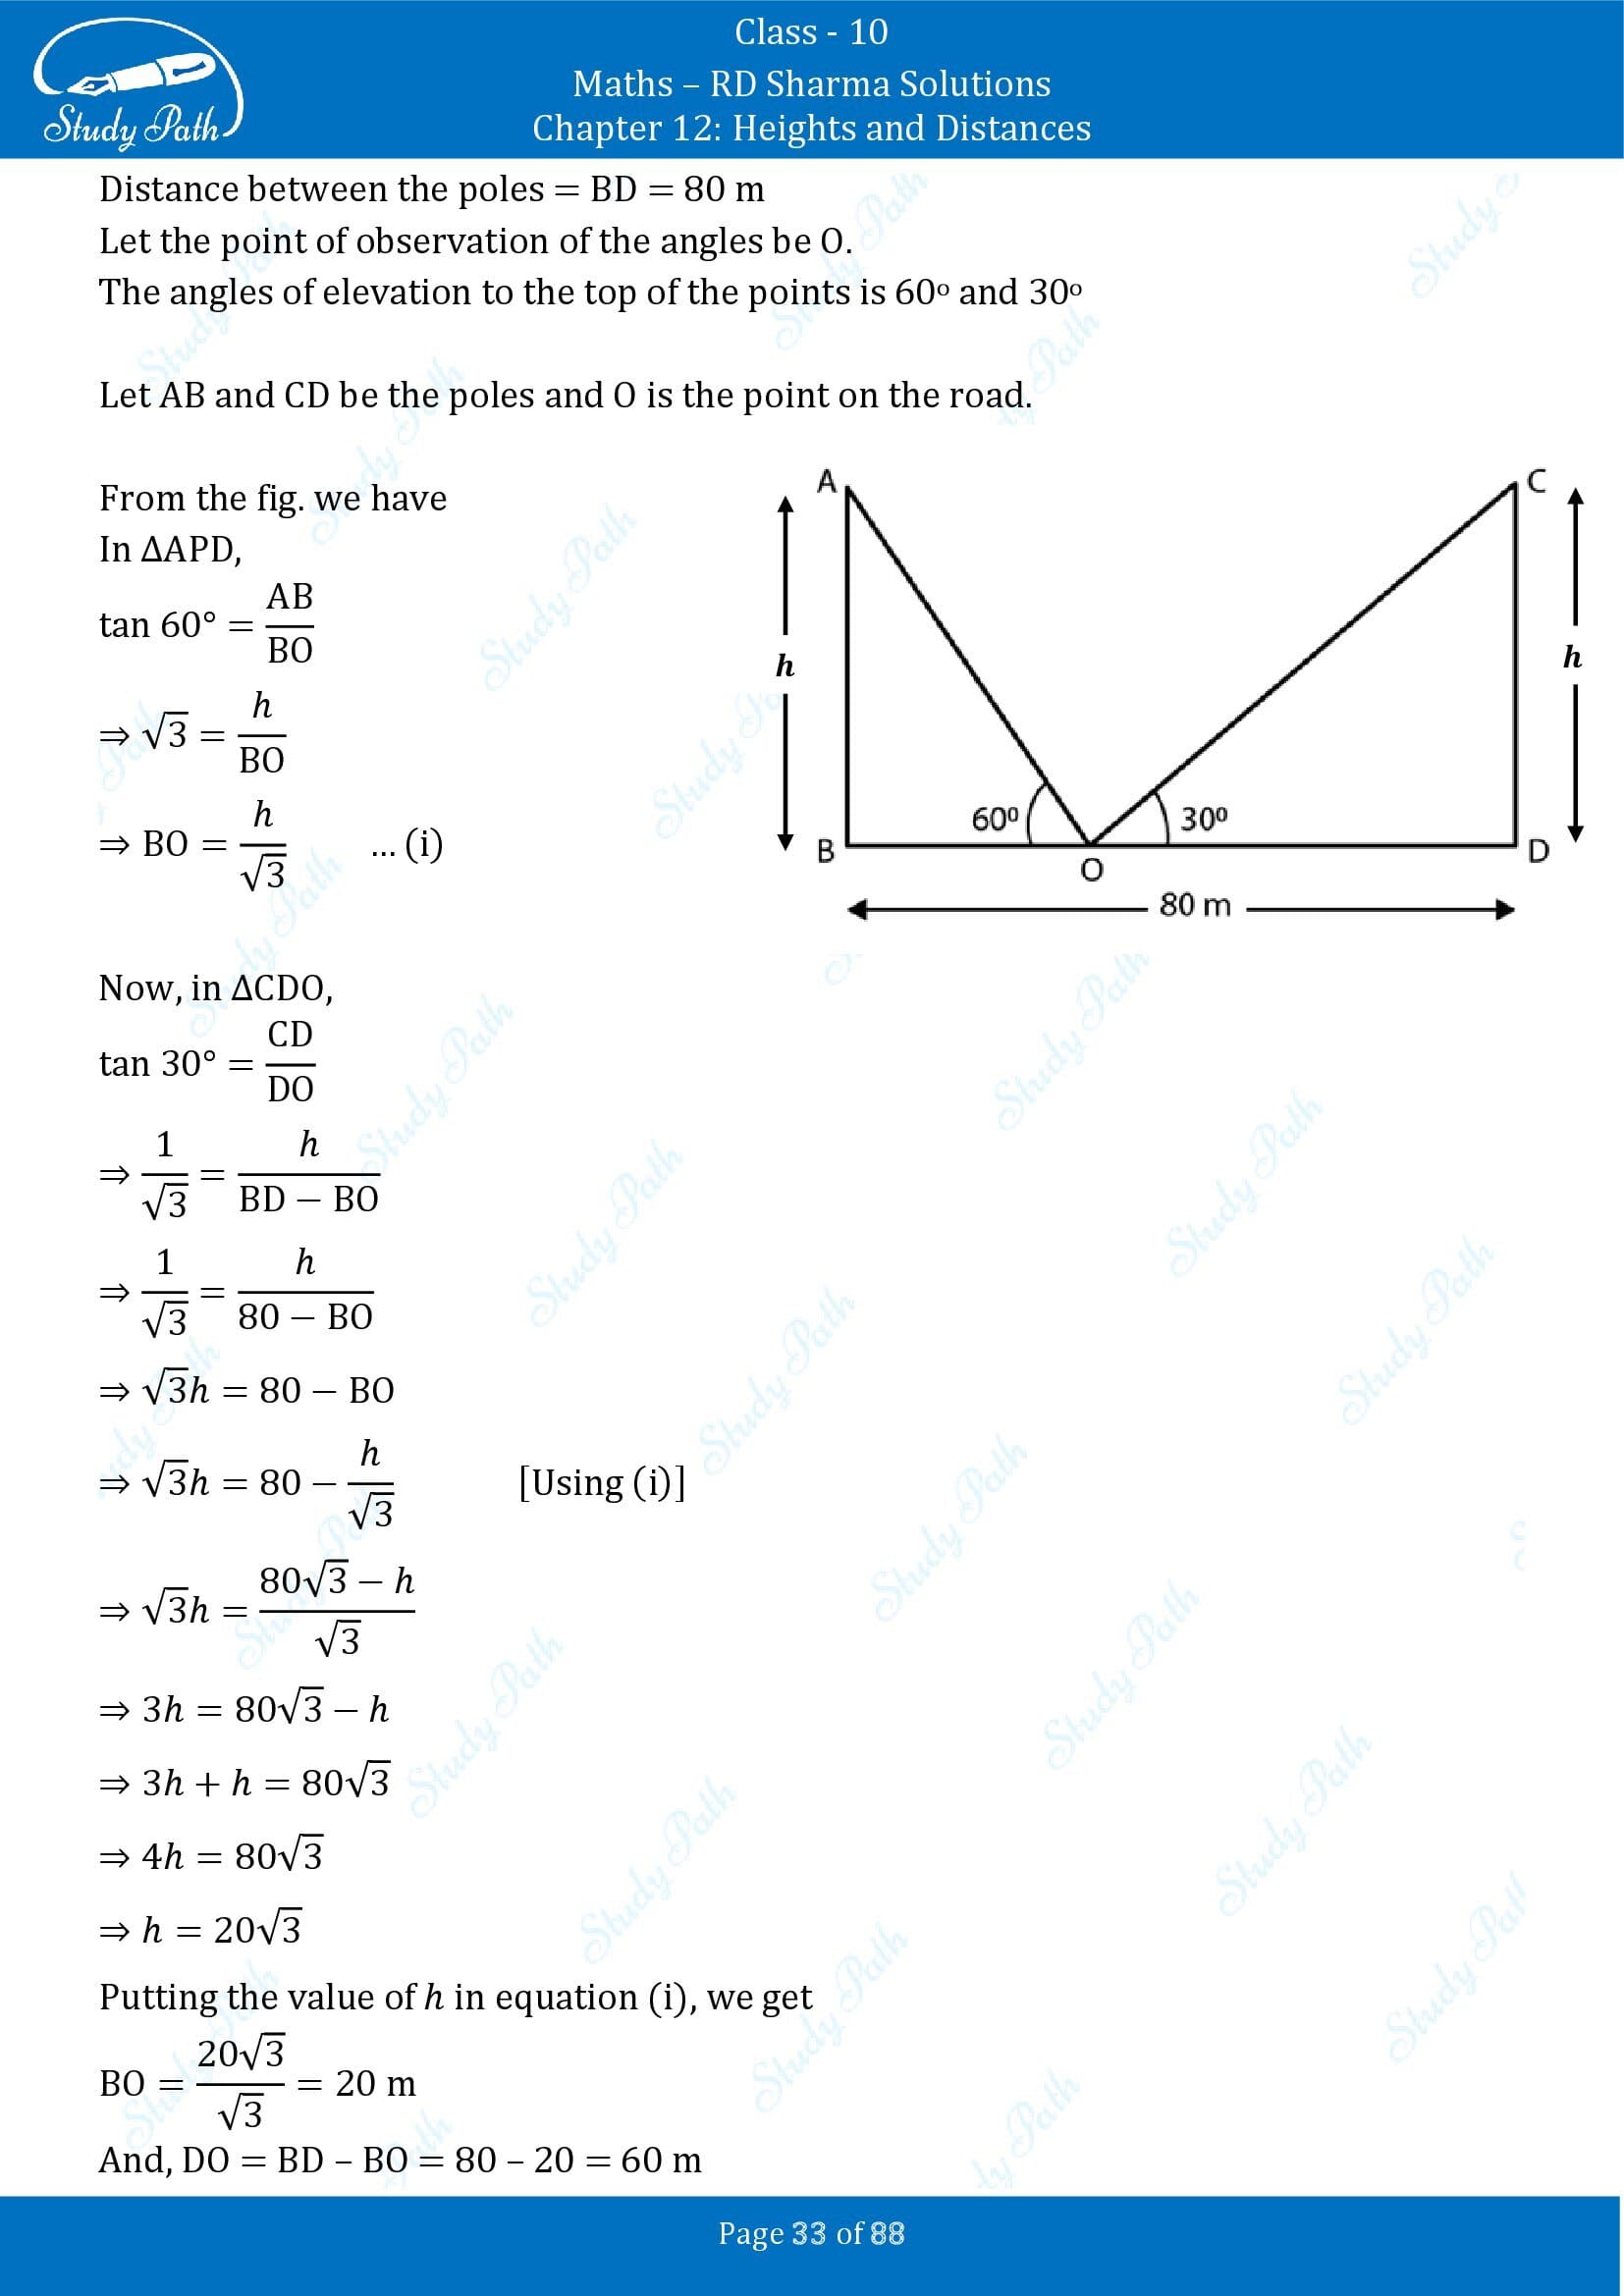 RD Sharma Solutions Class 10 Chapter 12 Heights and Distances Exercise 12.1 00033